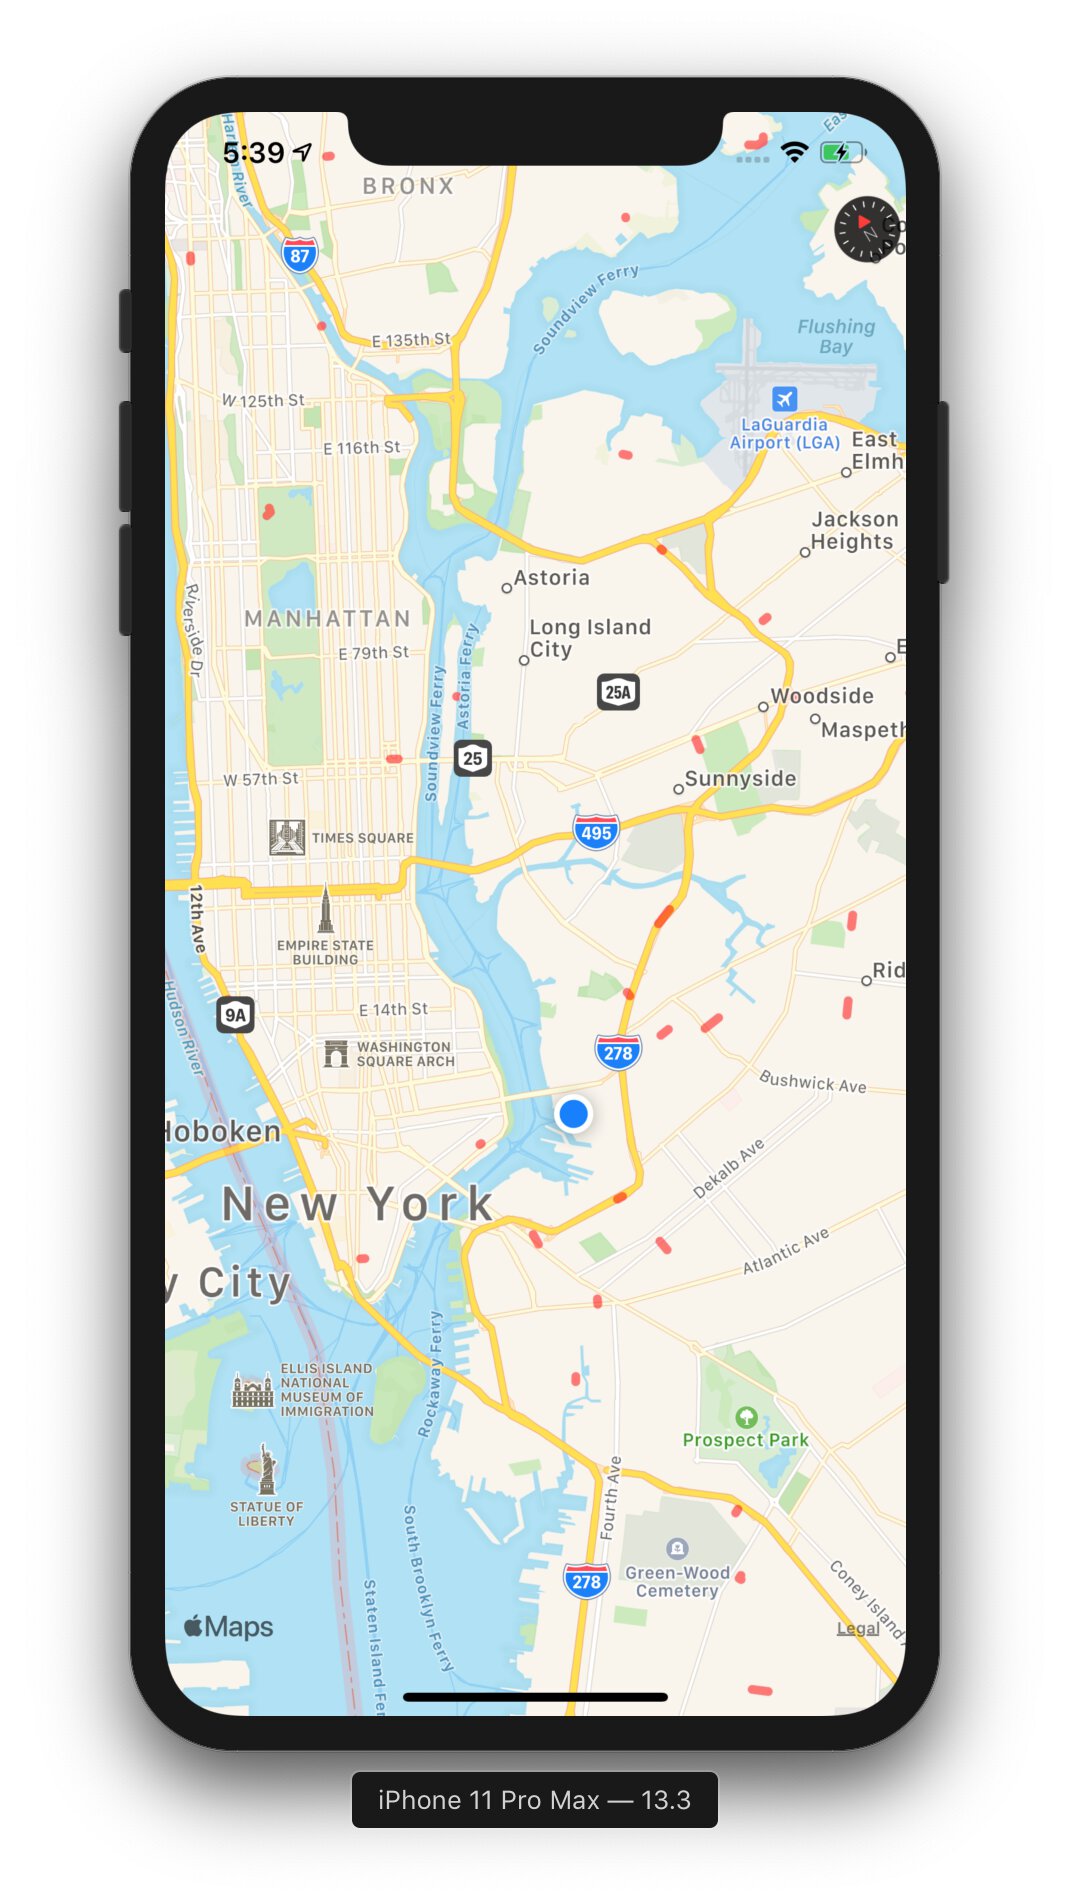 A screenshot from the iOS simulator showing a map of New York with a bunch of random, sparse road segments highlighted.